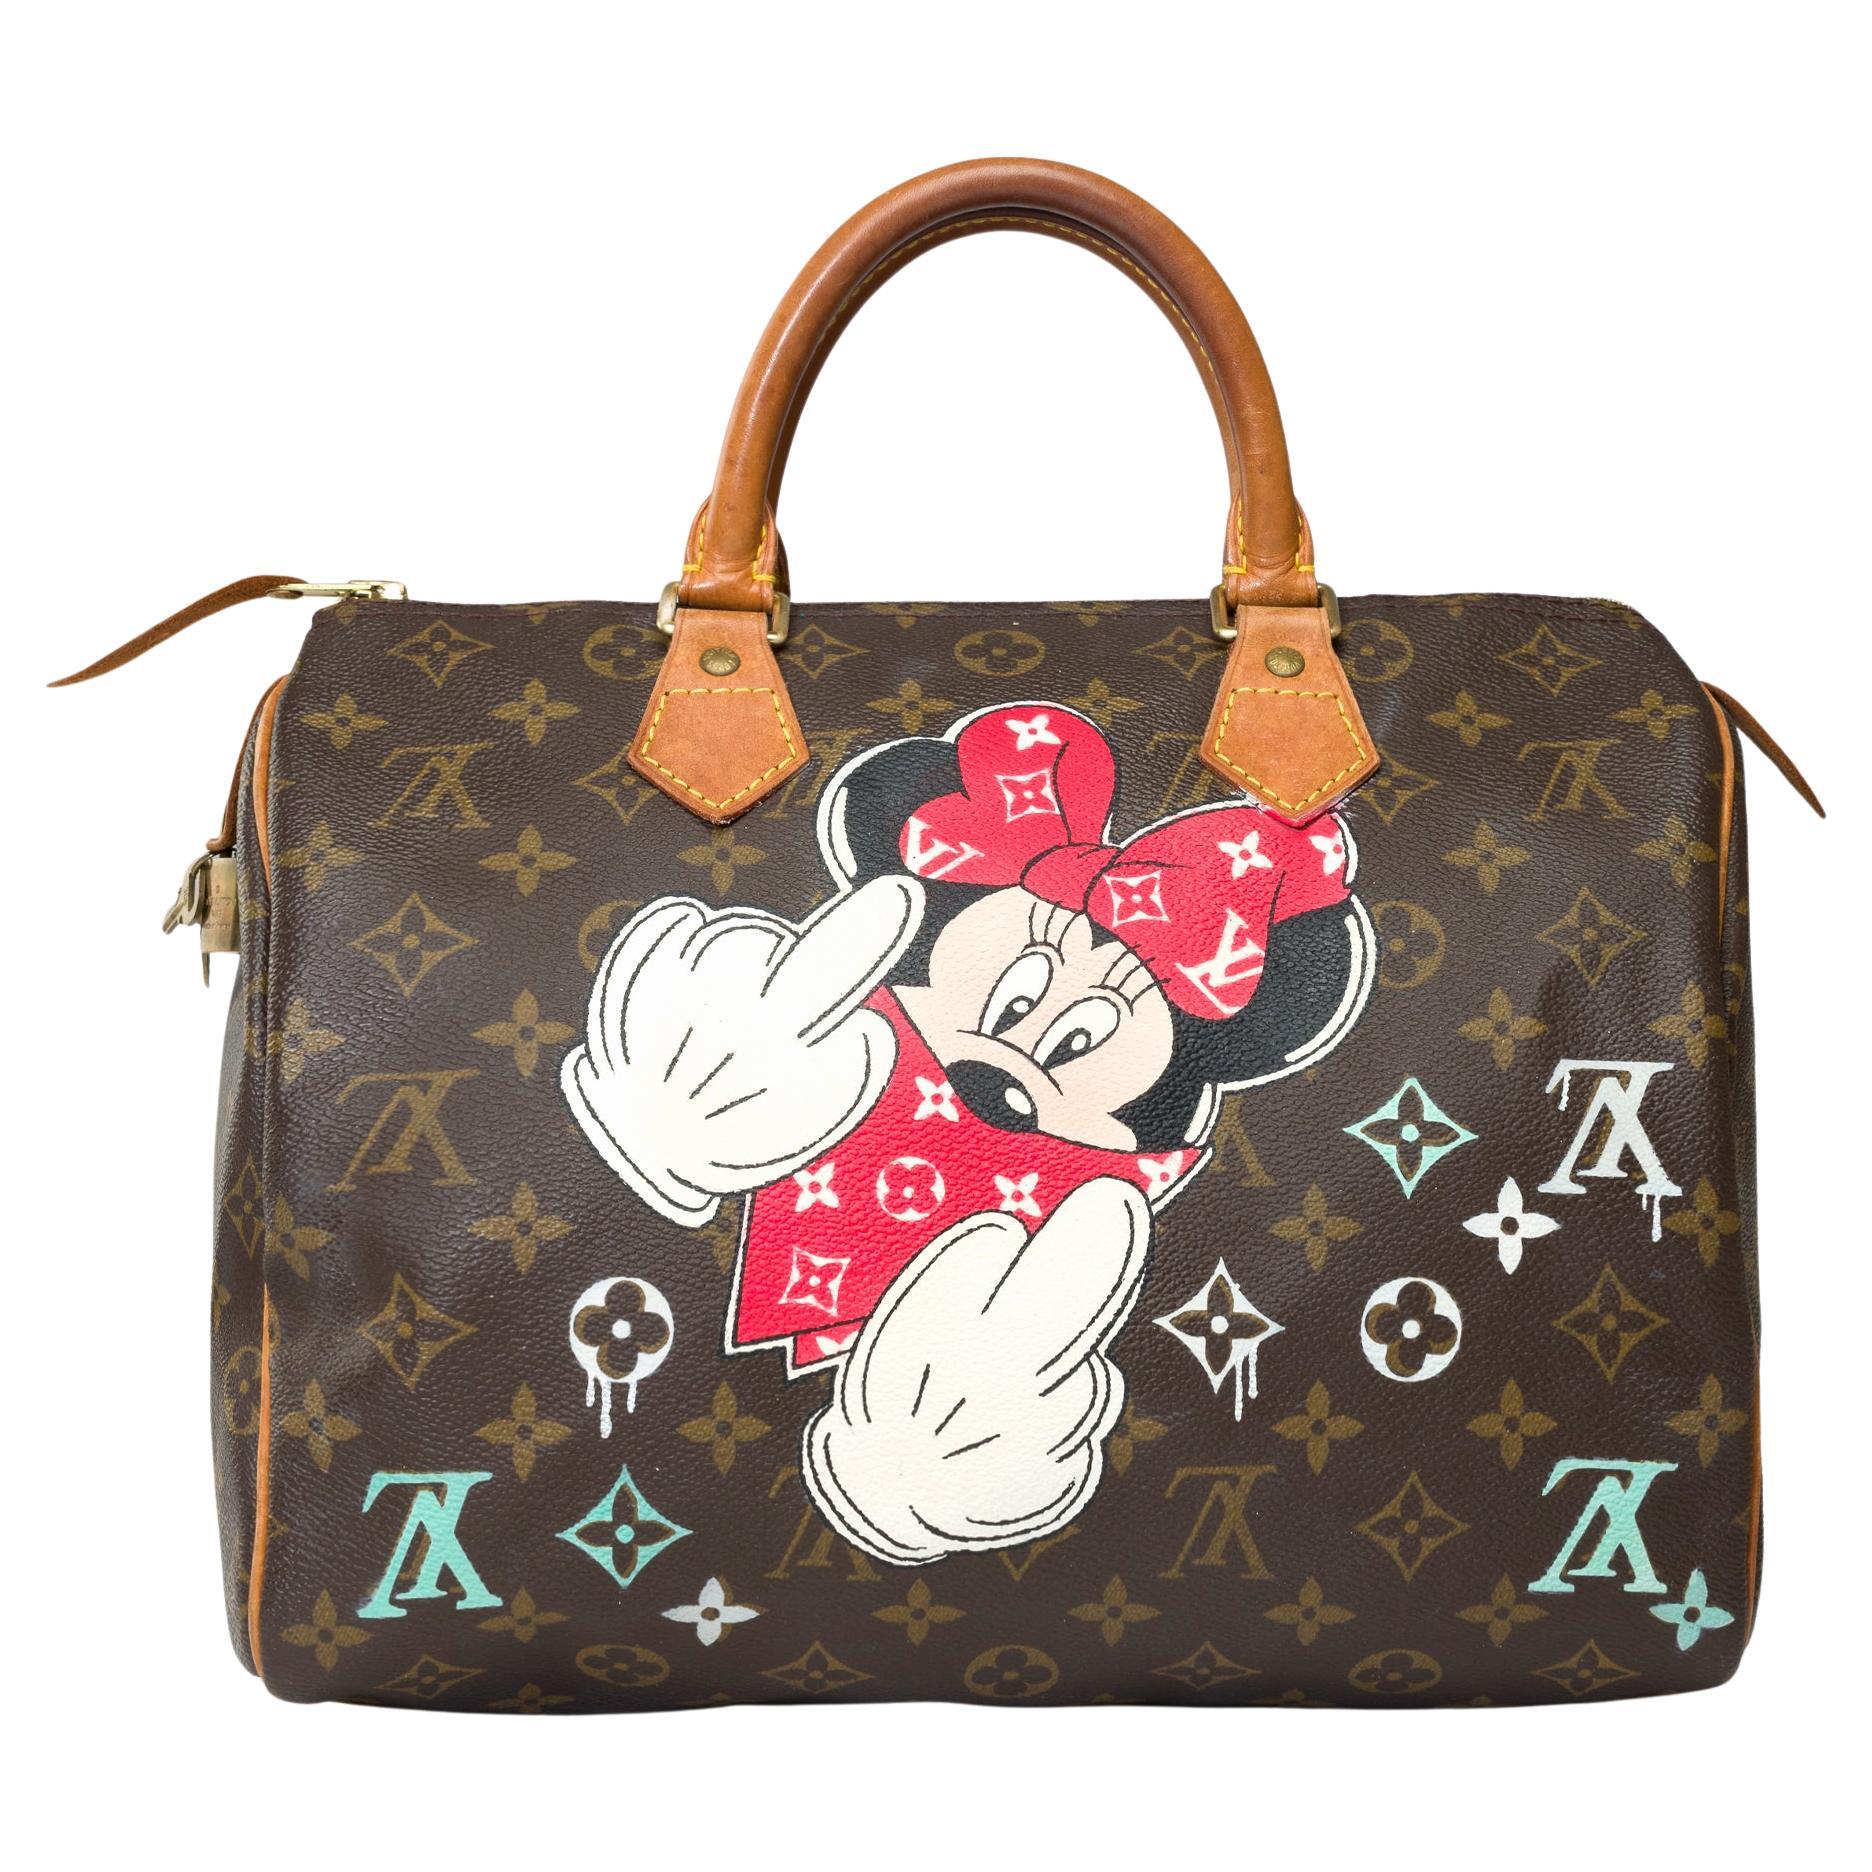 Customized Louis Vuitton Speedy 30 "I Hate You So Much" handbag in brown canvas For Sale